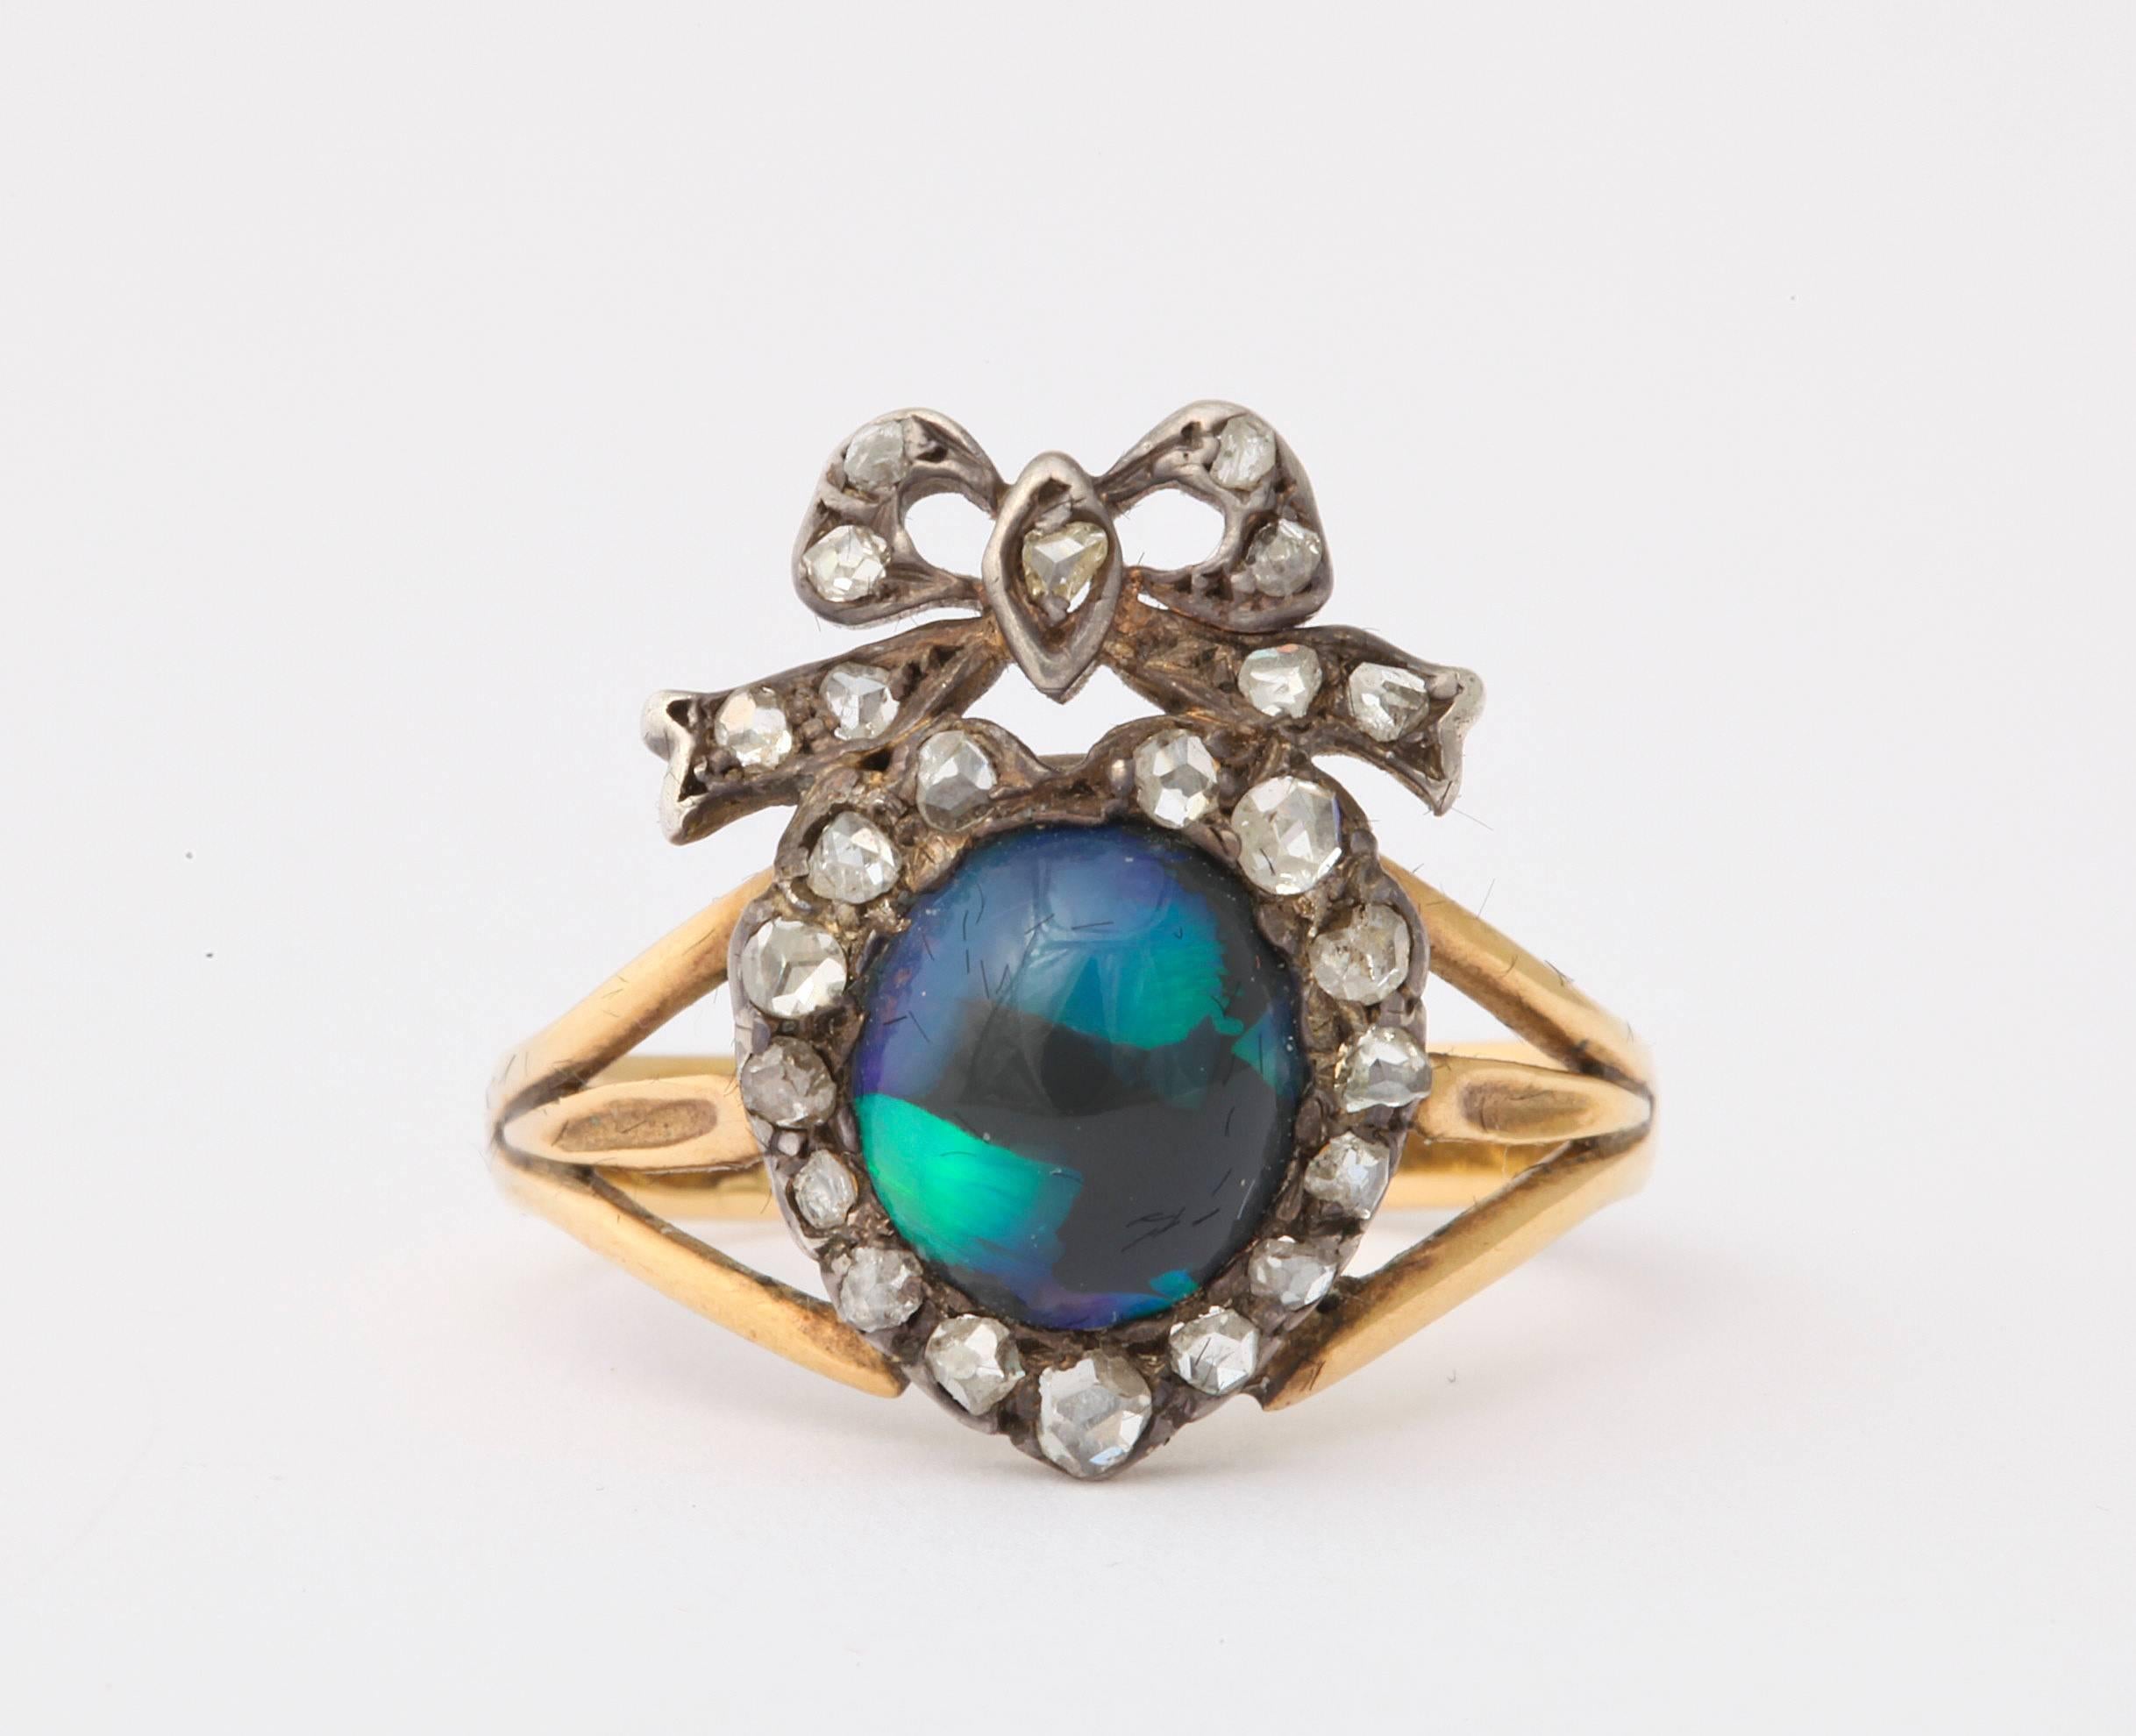 This beauty of a black opal and diamond ring touches the heart of the first to see it. The breath halts at the moment the color and iridescent glow strike the senses. Its quality sings in celebration of a relationship to each who view it . The stone